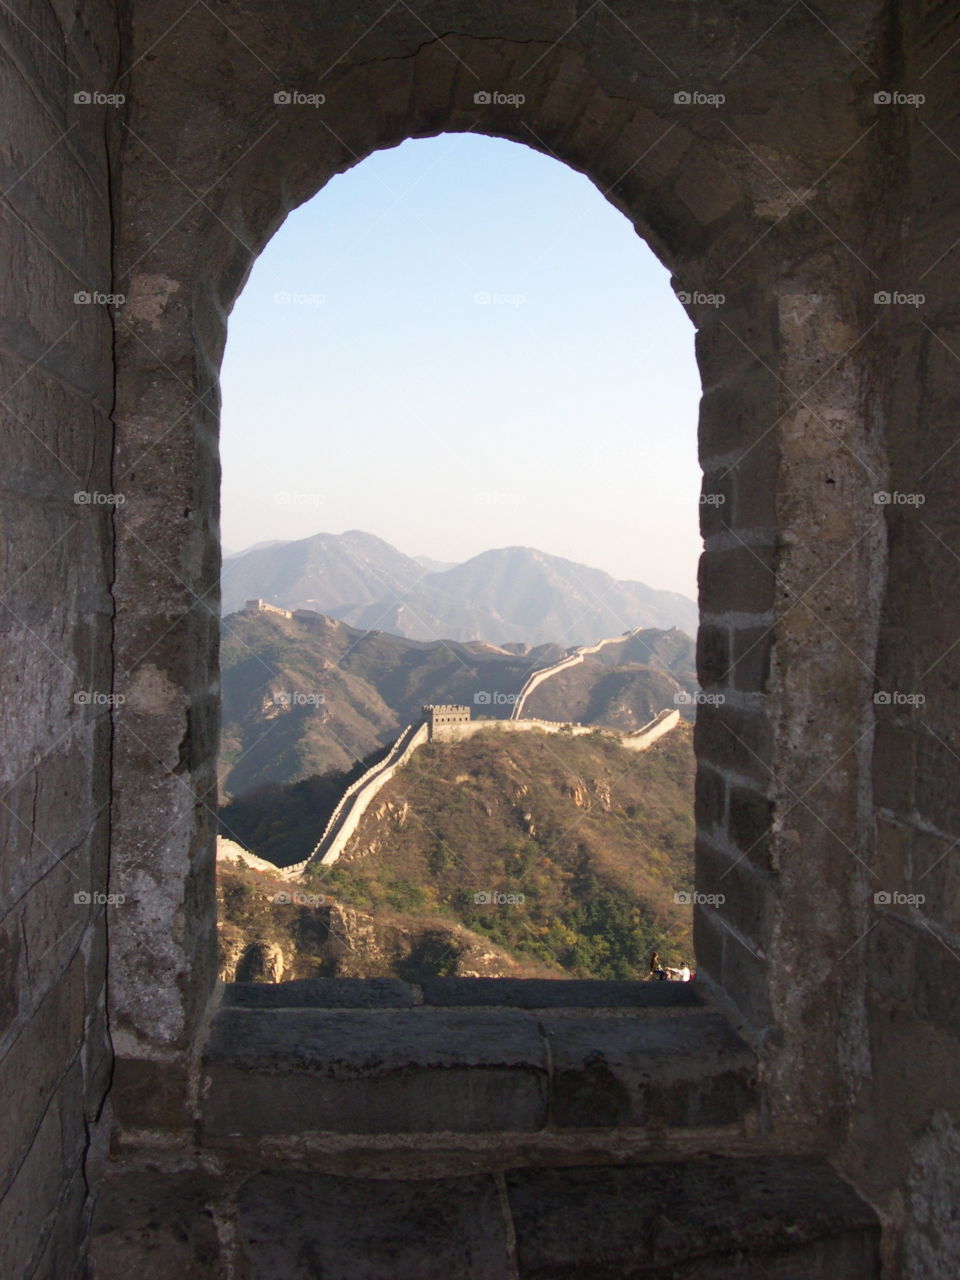 The Great Wall. View through a window of the Great Wall